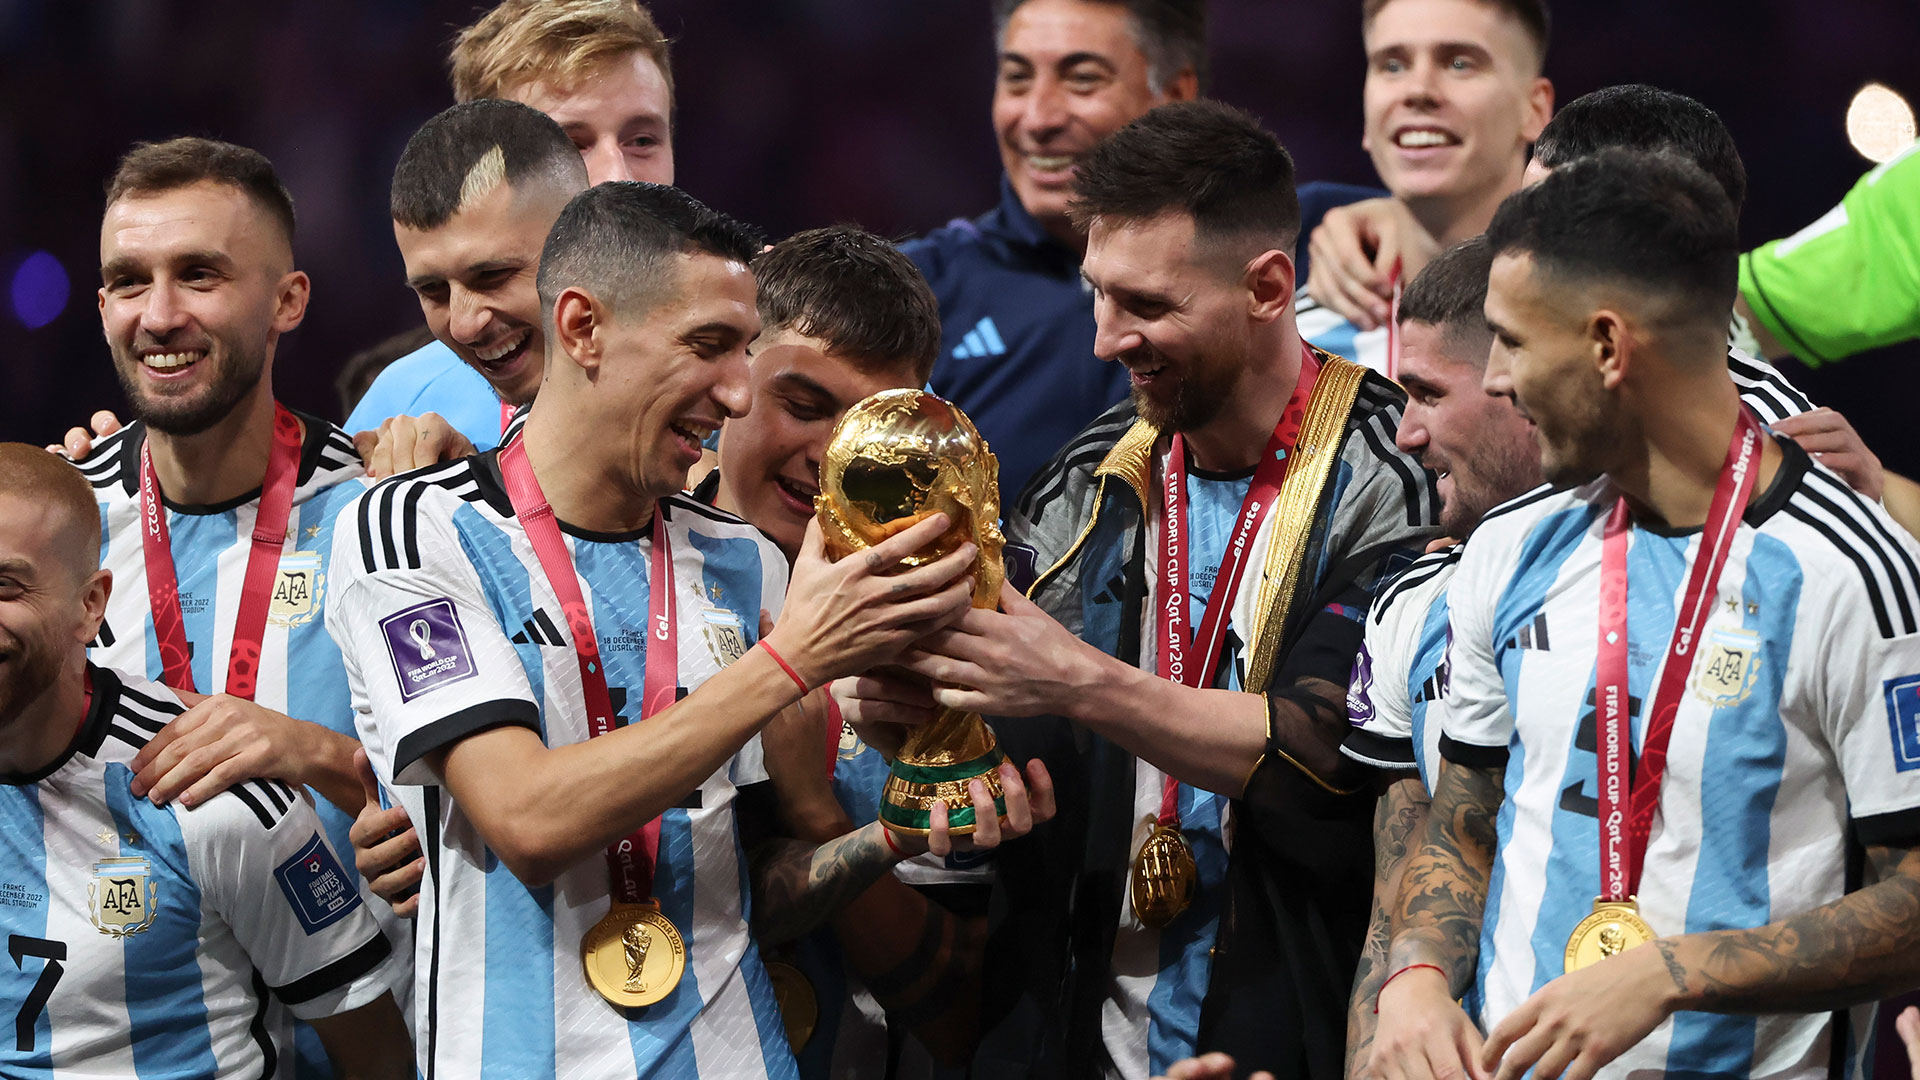 LUSAIL CITY, QATAR - DECEMBER 18: Angel Di Maria, Lionel Messi of Argentina - holding the World Cup - and teammates celebrate during the trophy ceremony following the FIFA World Cup Qatar 2022 Final match between Argentina and France at Lusail Stadium on December 18, 2022 in Lusail City, Qatar. (Photo by Jean Catuffe/Getty Images)